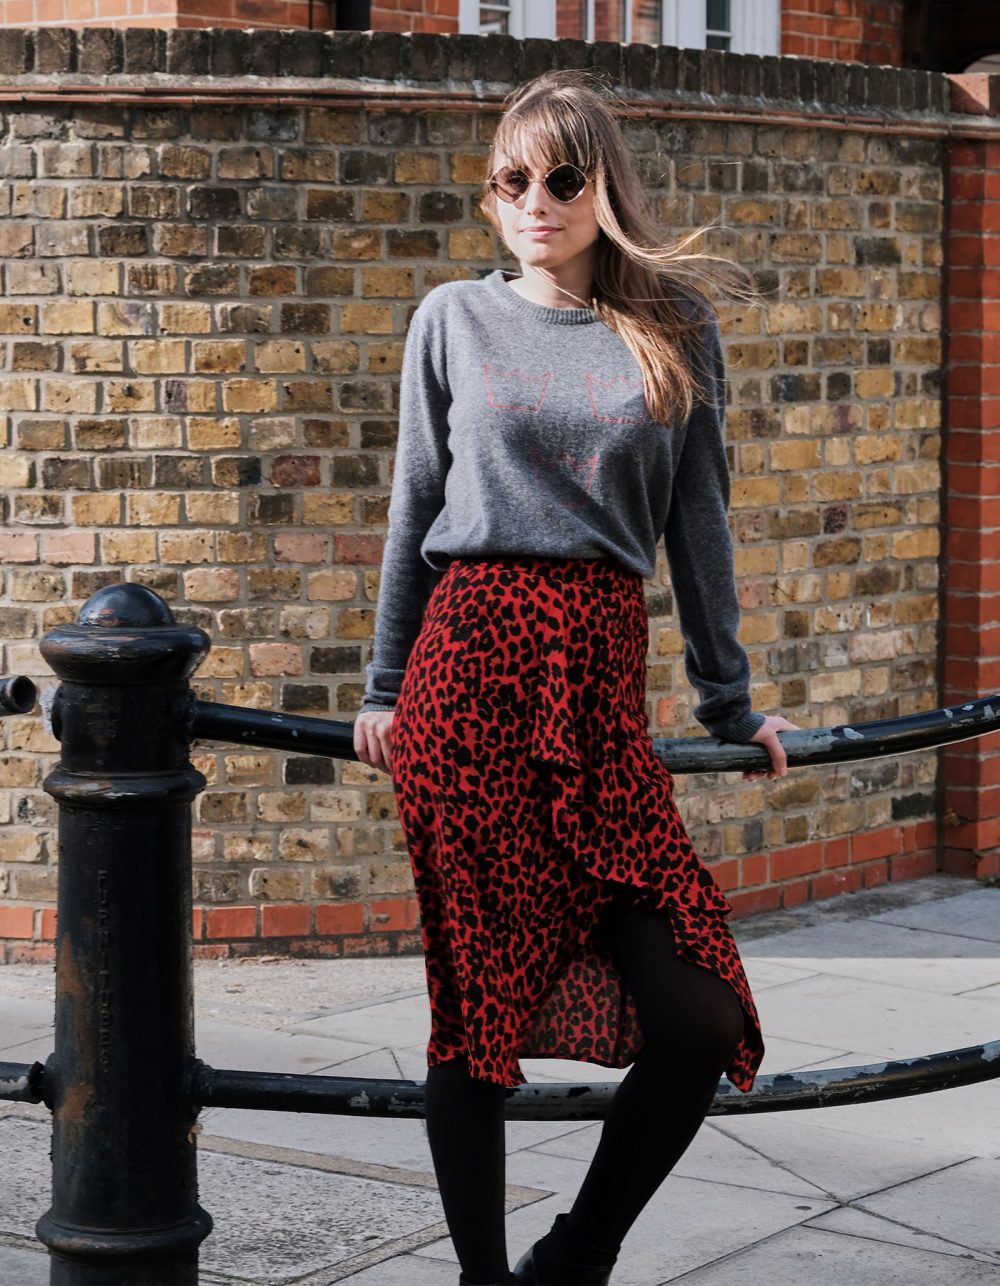 3 Crowns Cashmere Jumper by Malin Darlin being modelled on a London street.